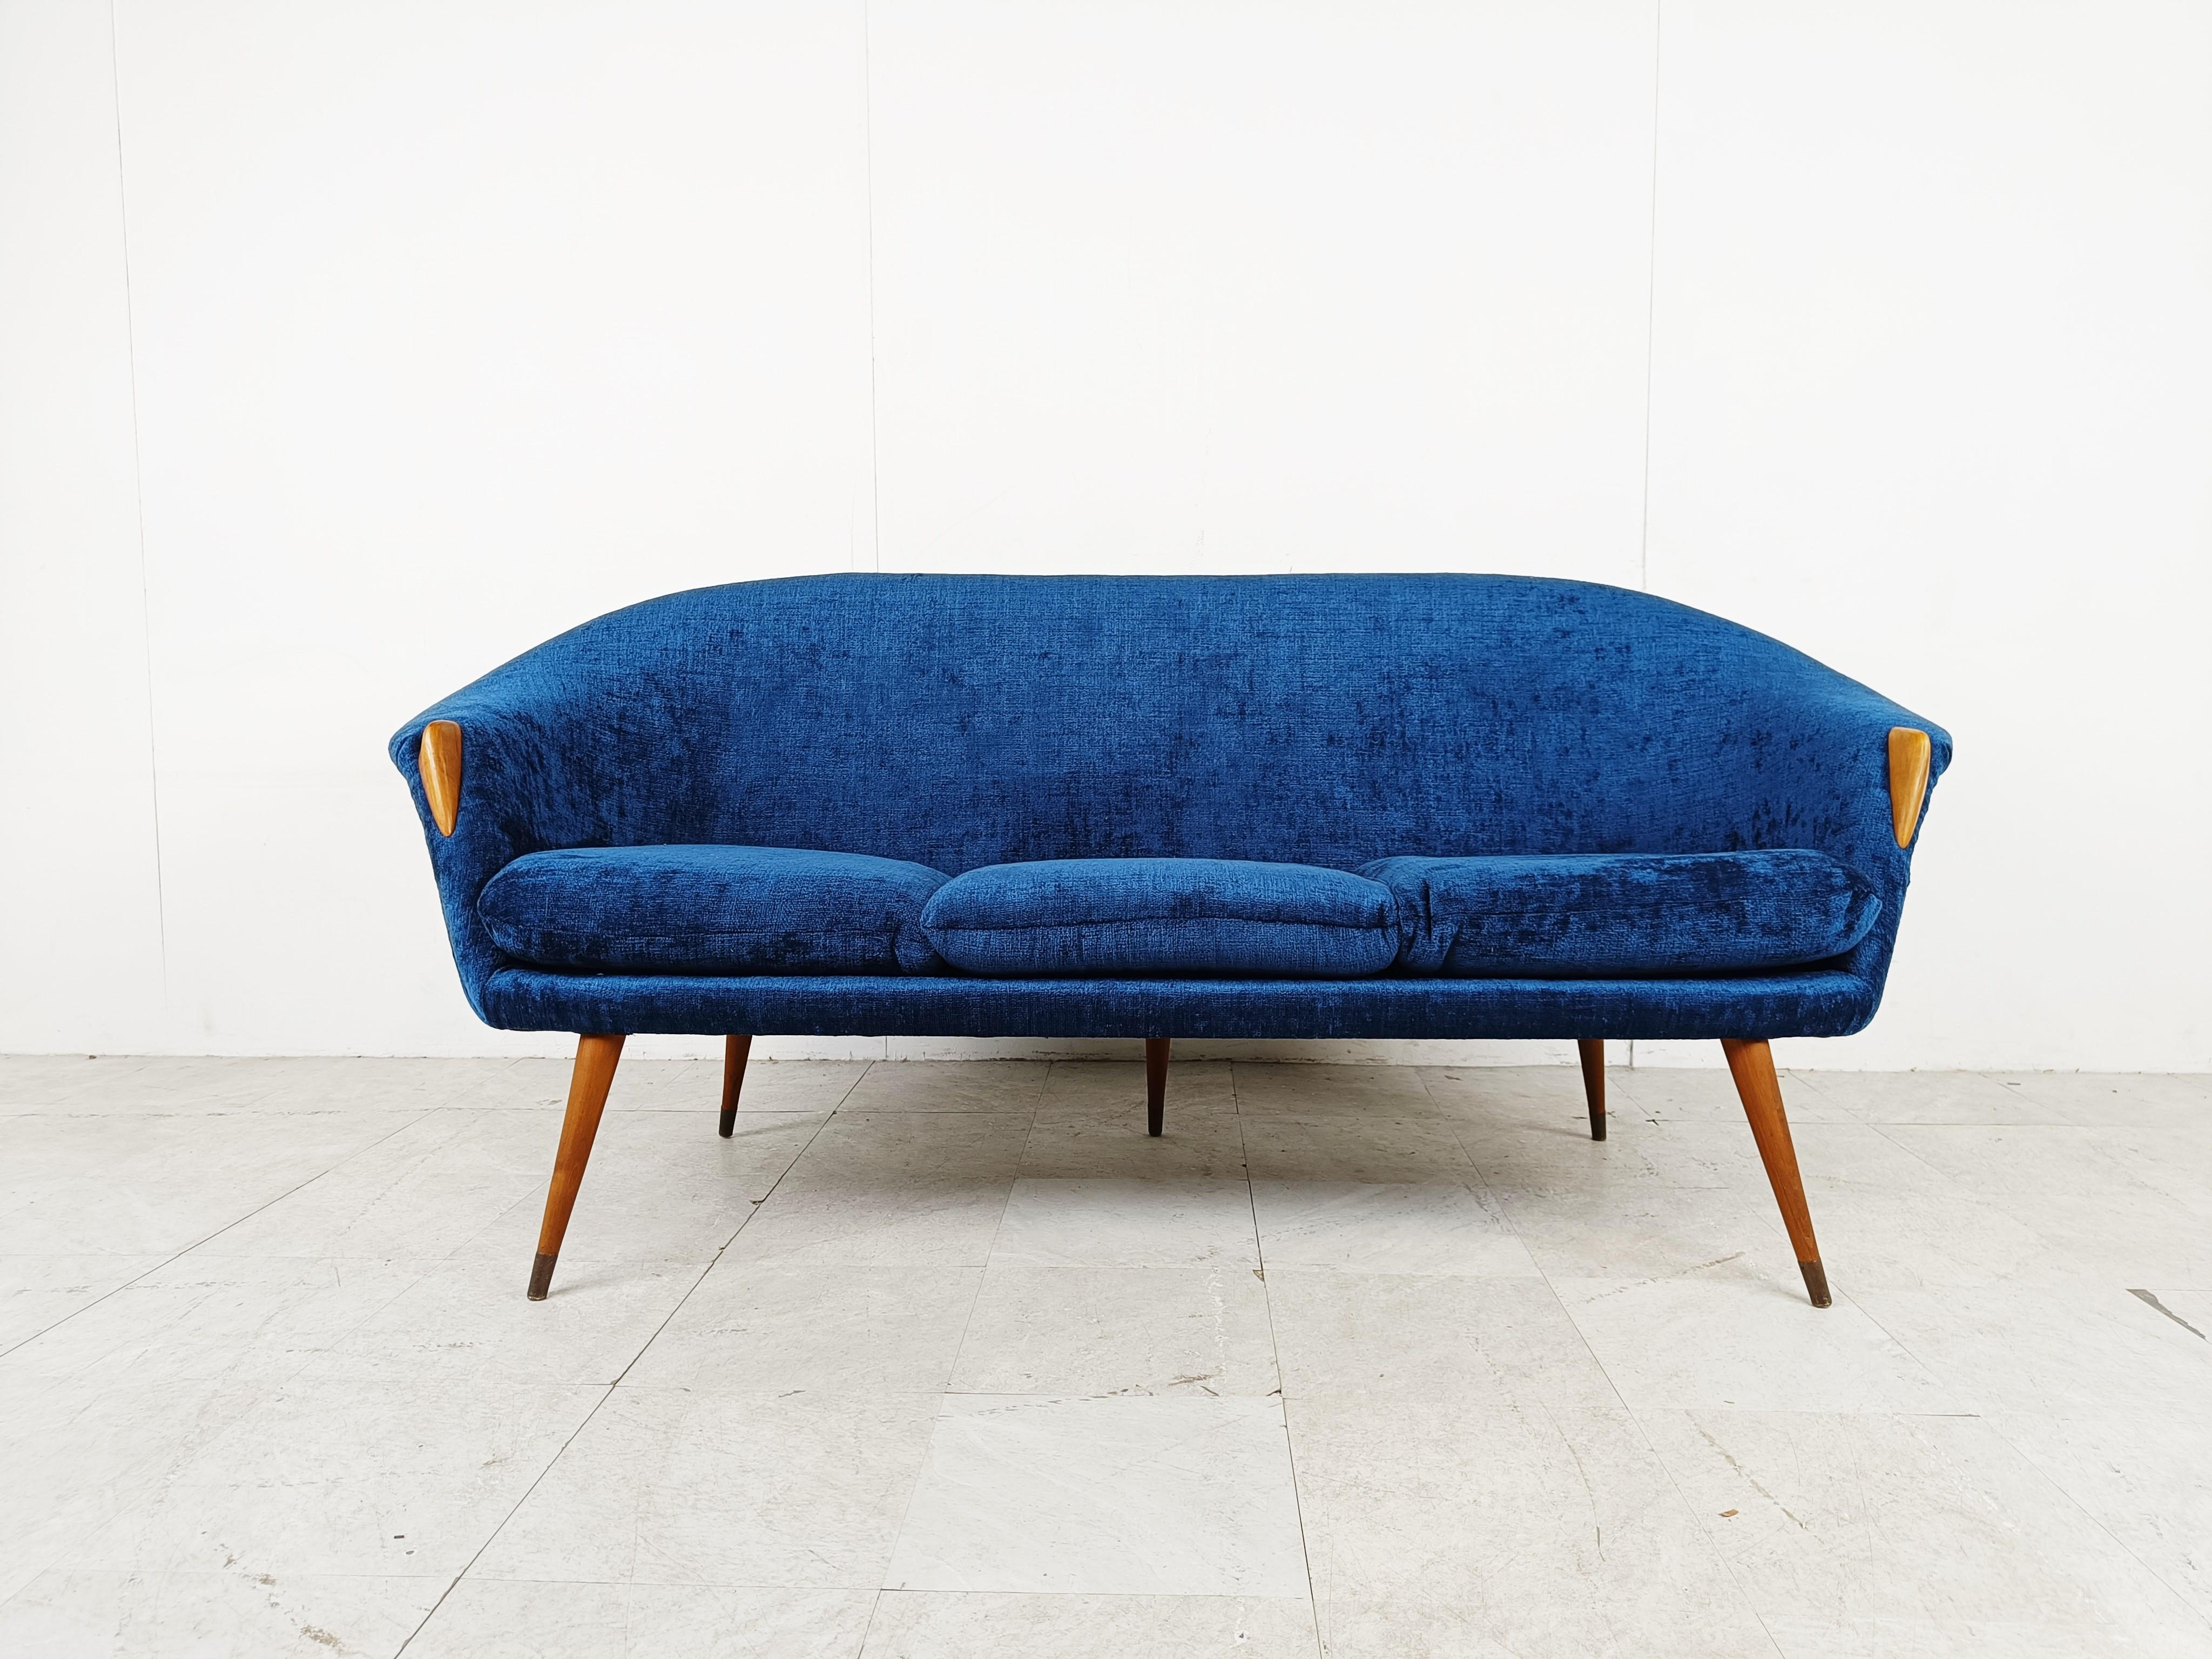 Scandinavian Modern Midcentury Sofa Attributed to Nanna Ditzel, 1950s For Sale